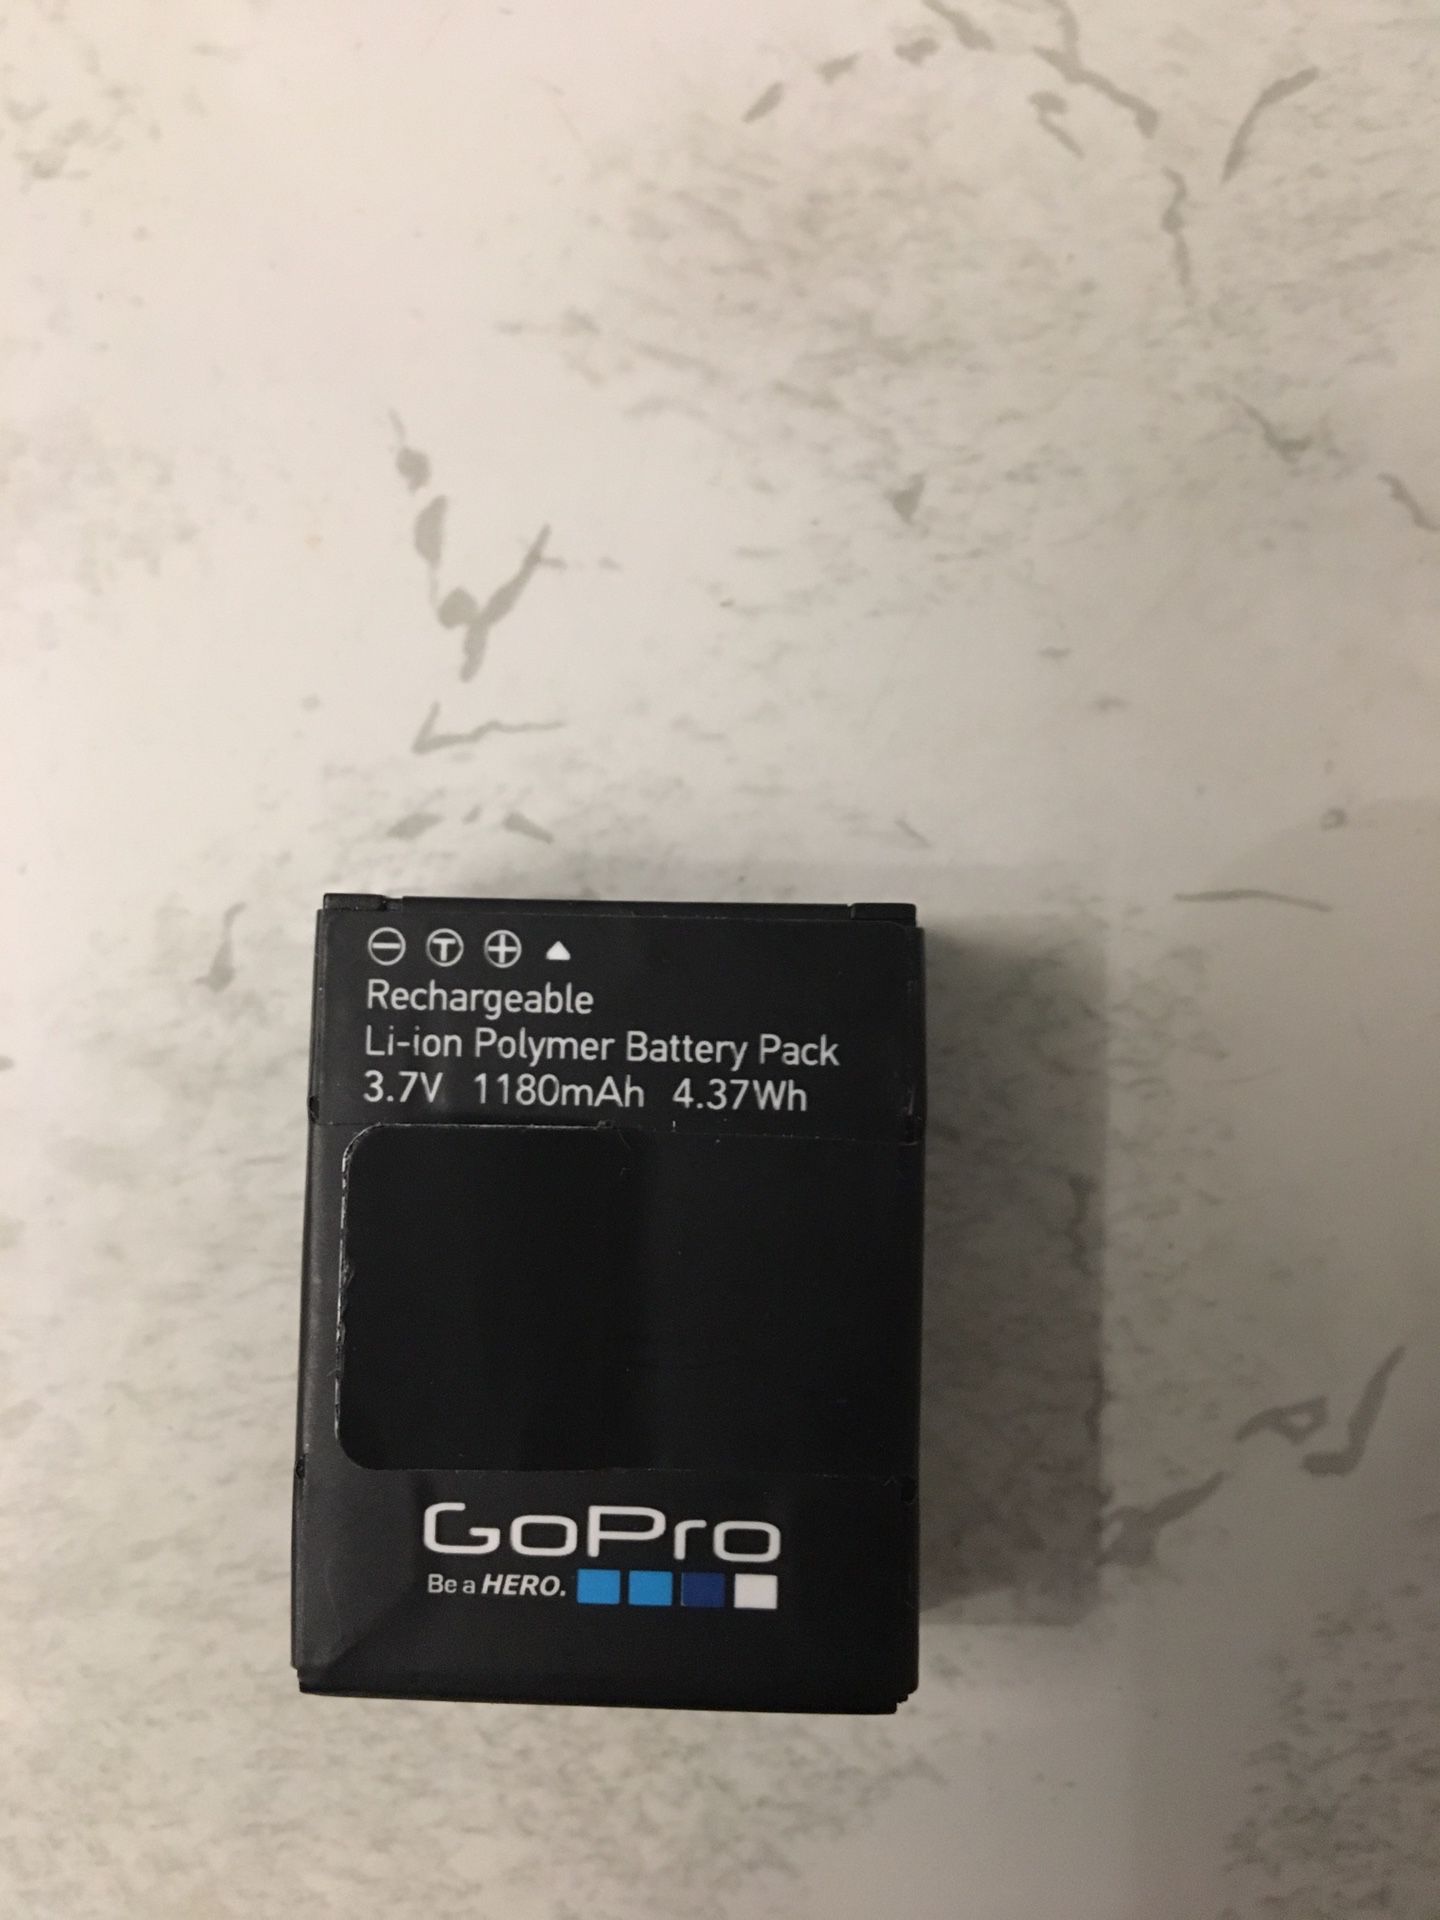 GoPro3 rechargeable battery